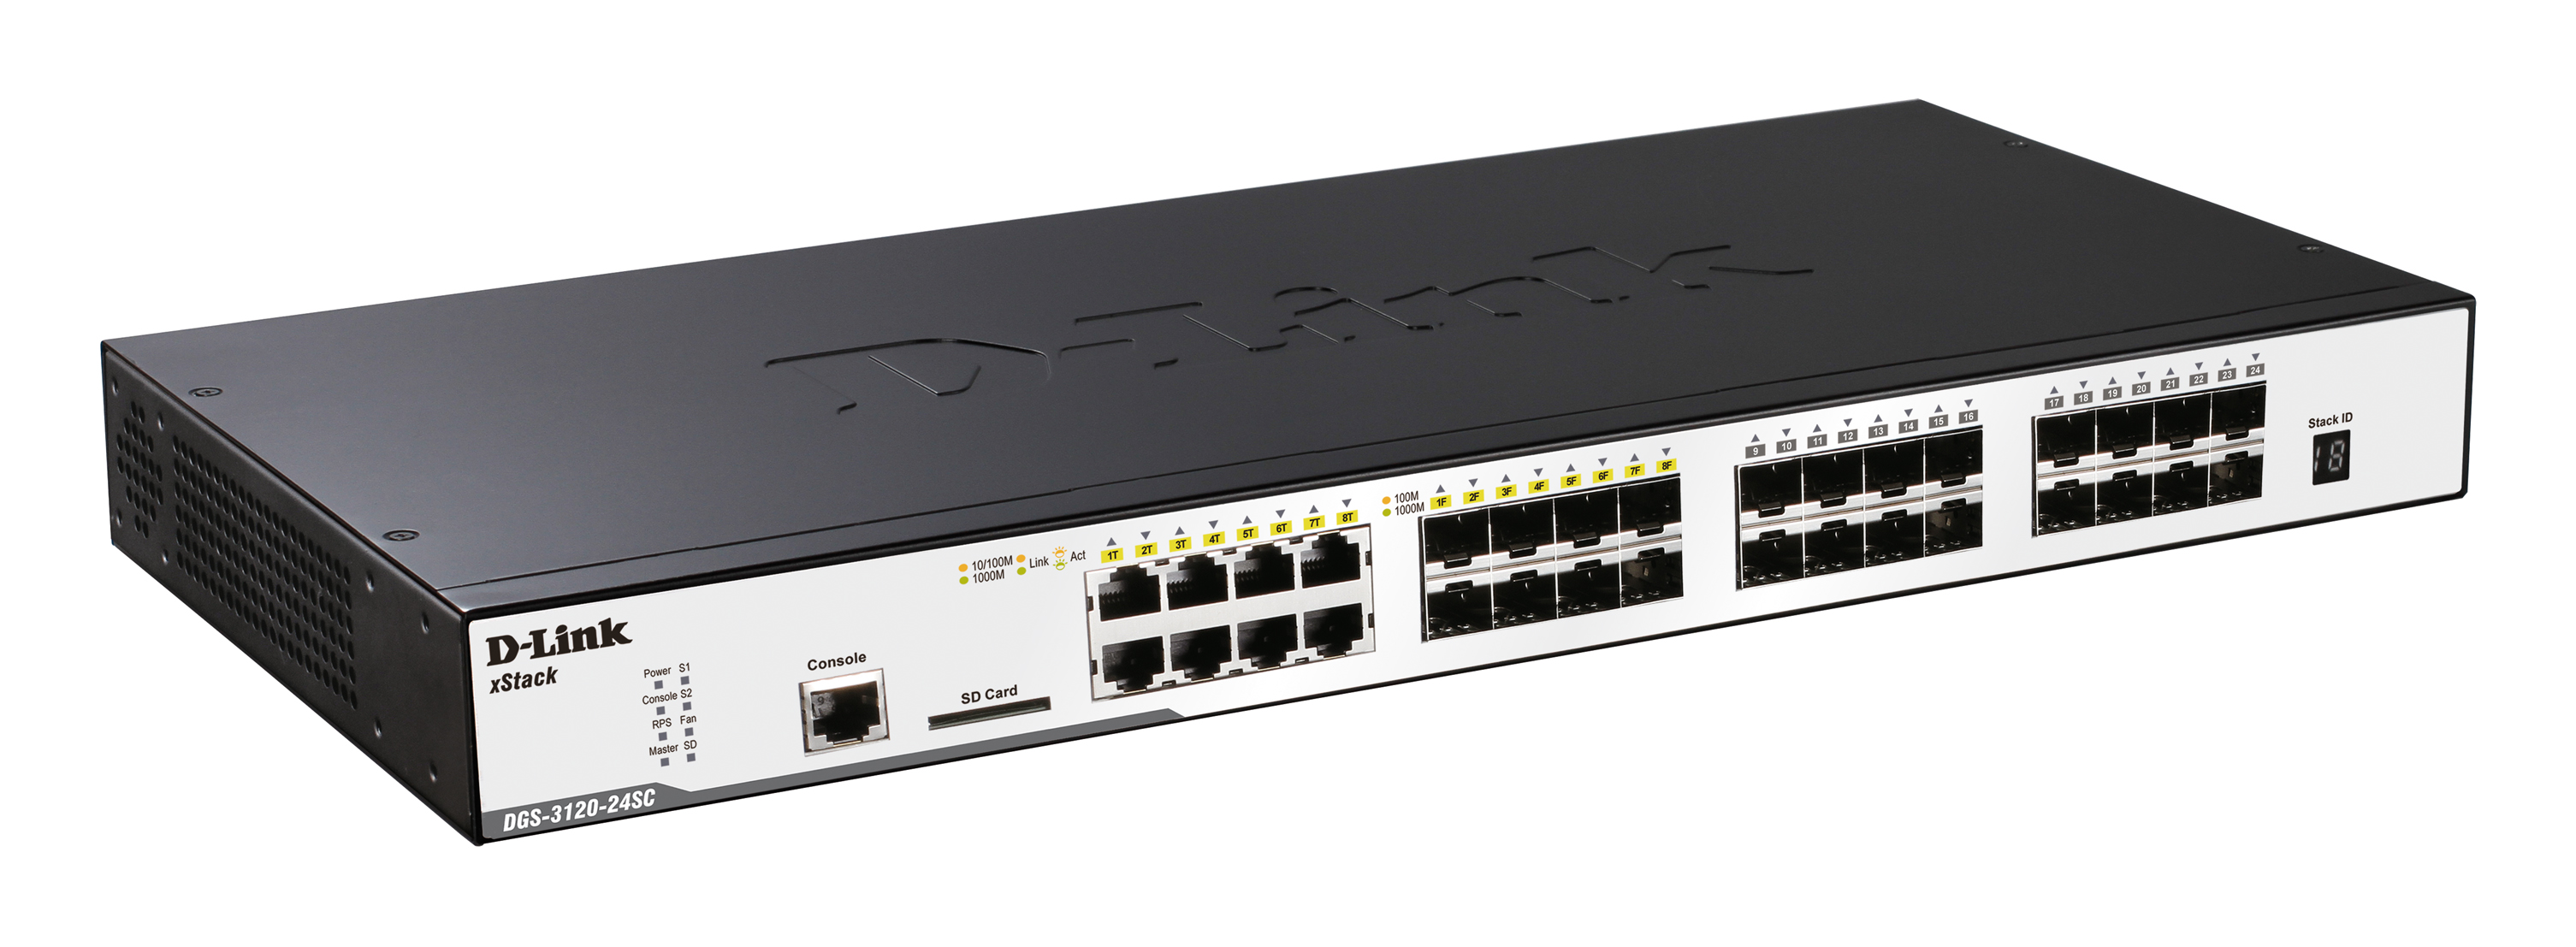 D-Link 24-Port PoE+ Gigabit Unmanaged Switch (370W PoE Budget) with 2 –  D-Link Systems, Inc